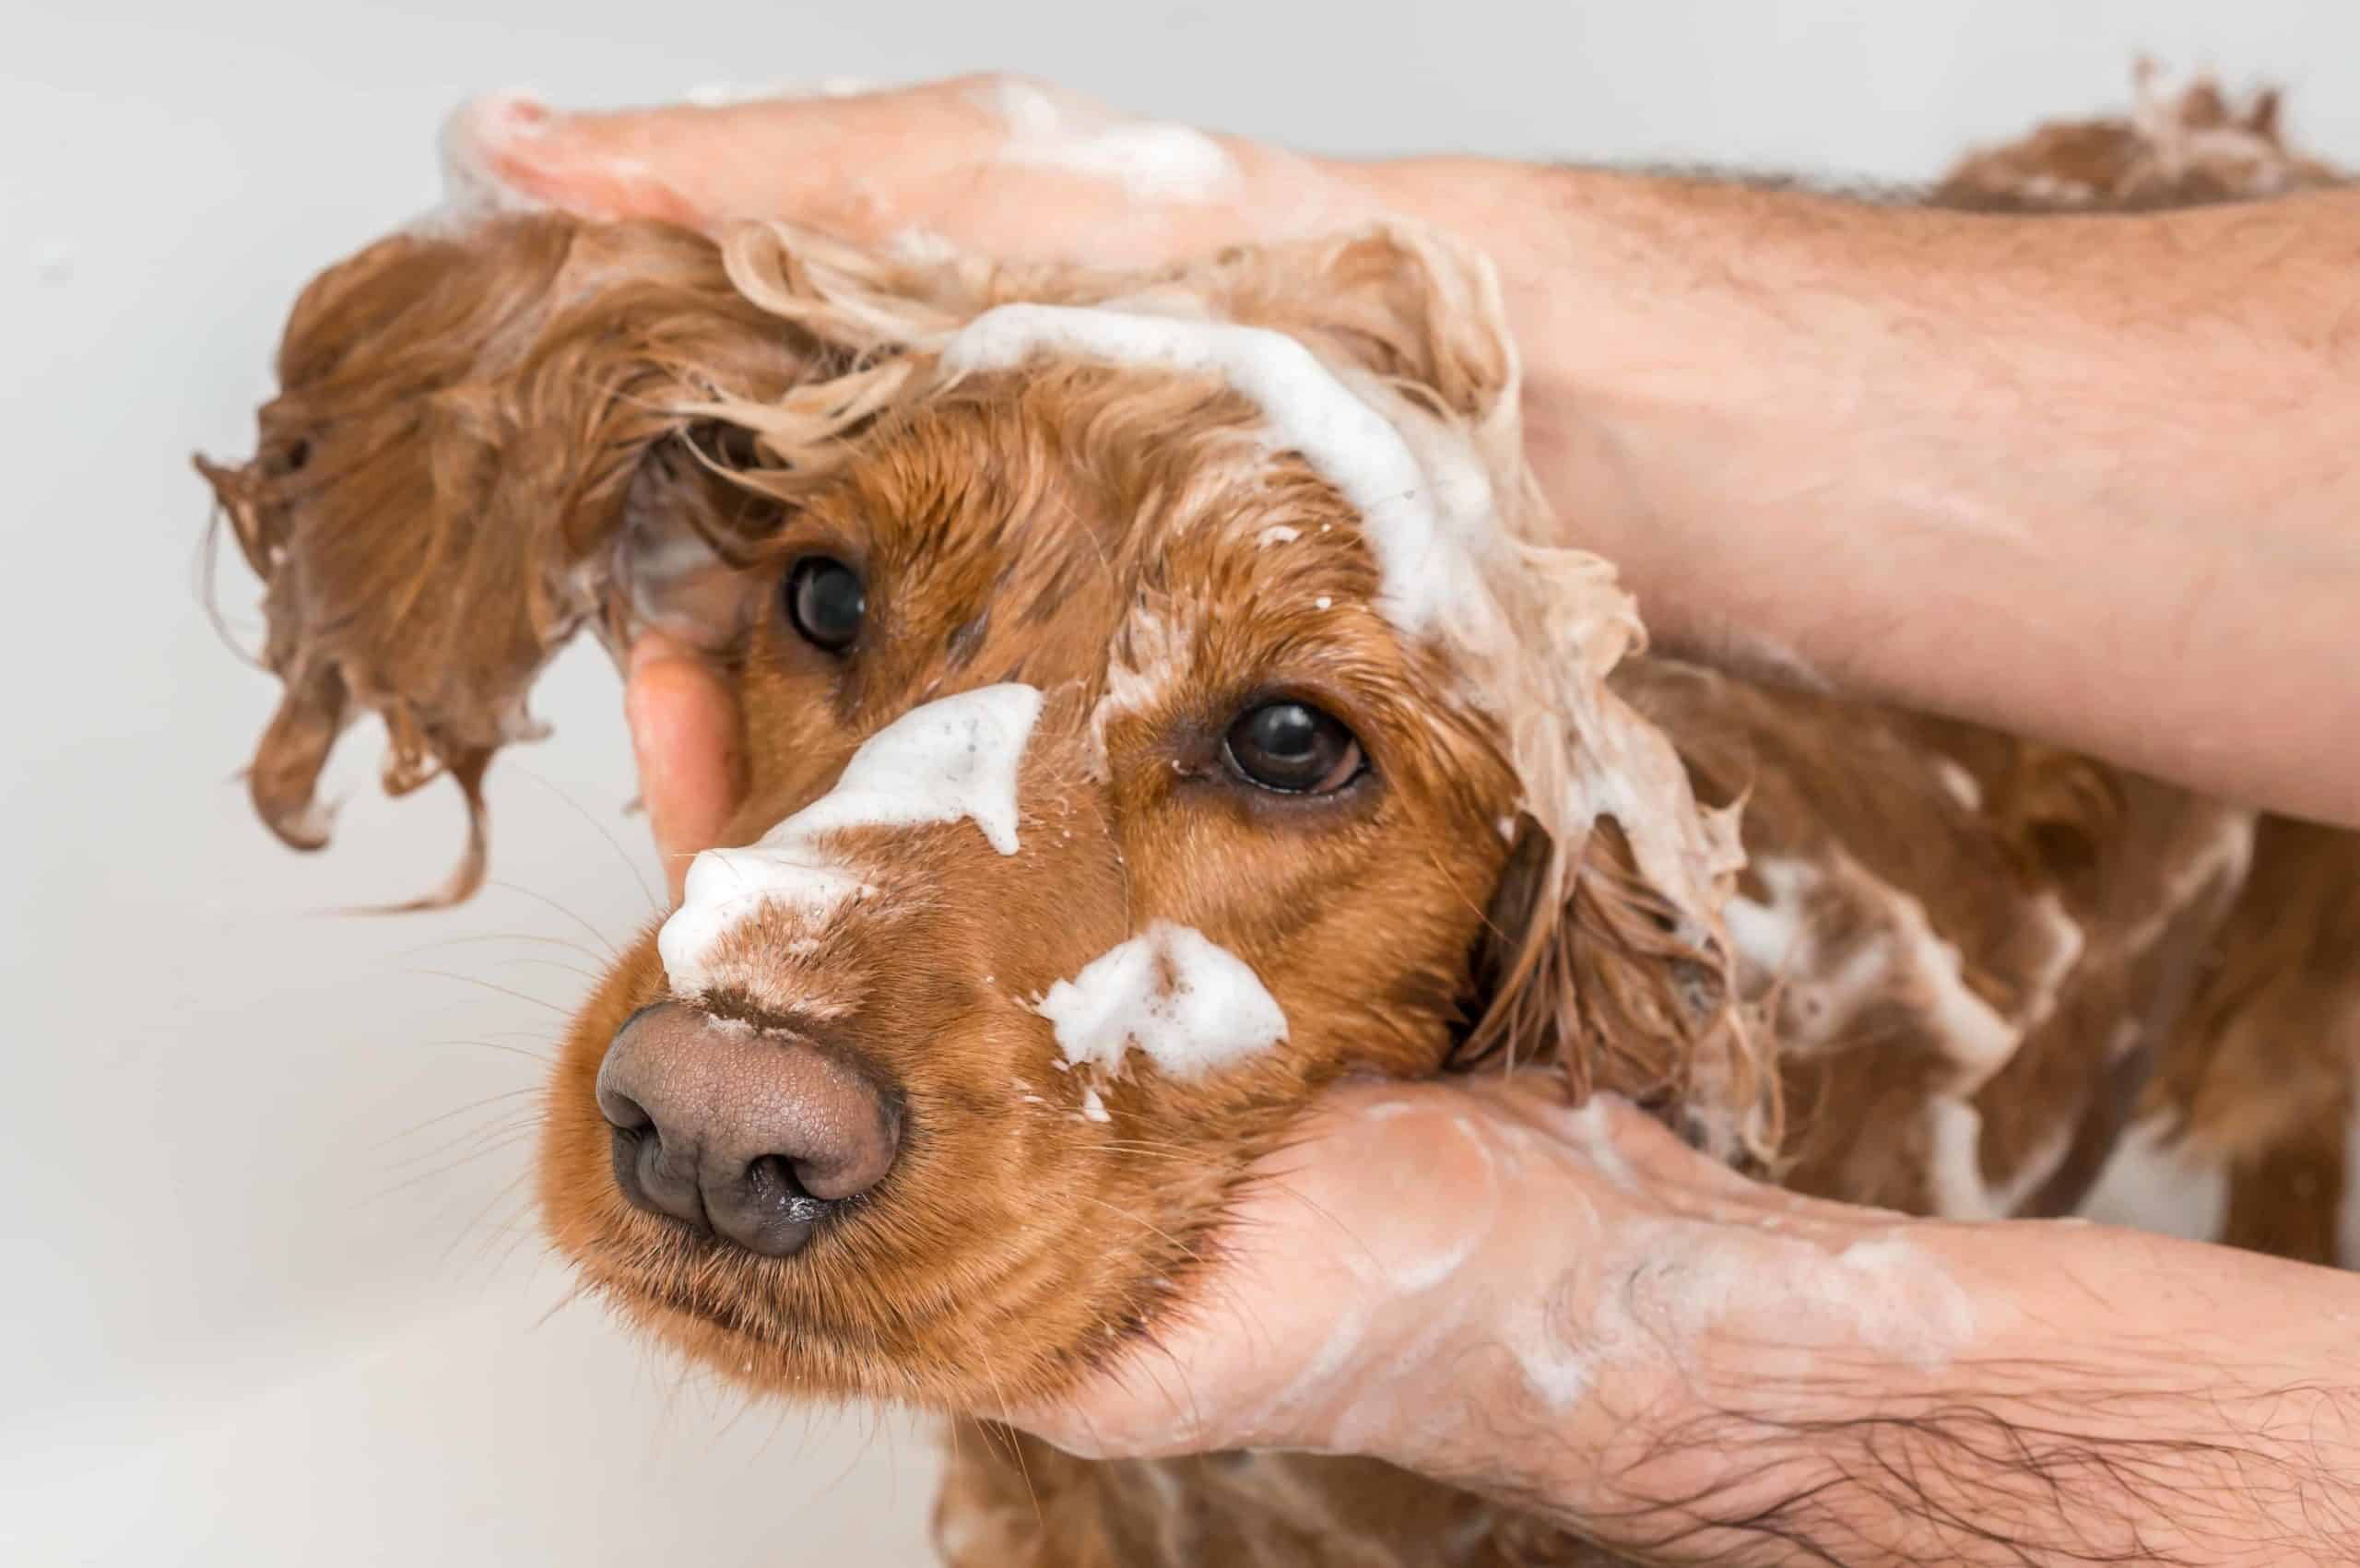 Owner gives golden retriever a bath. Dog grooming tools include shampoos and conditioners.